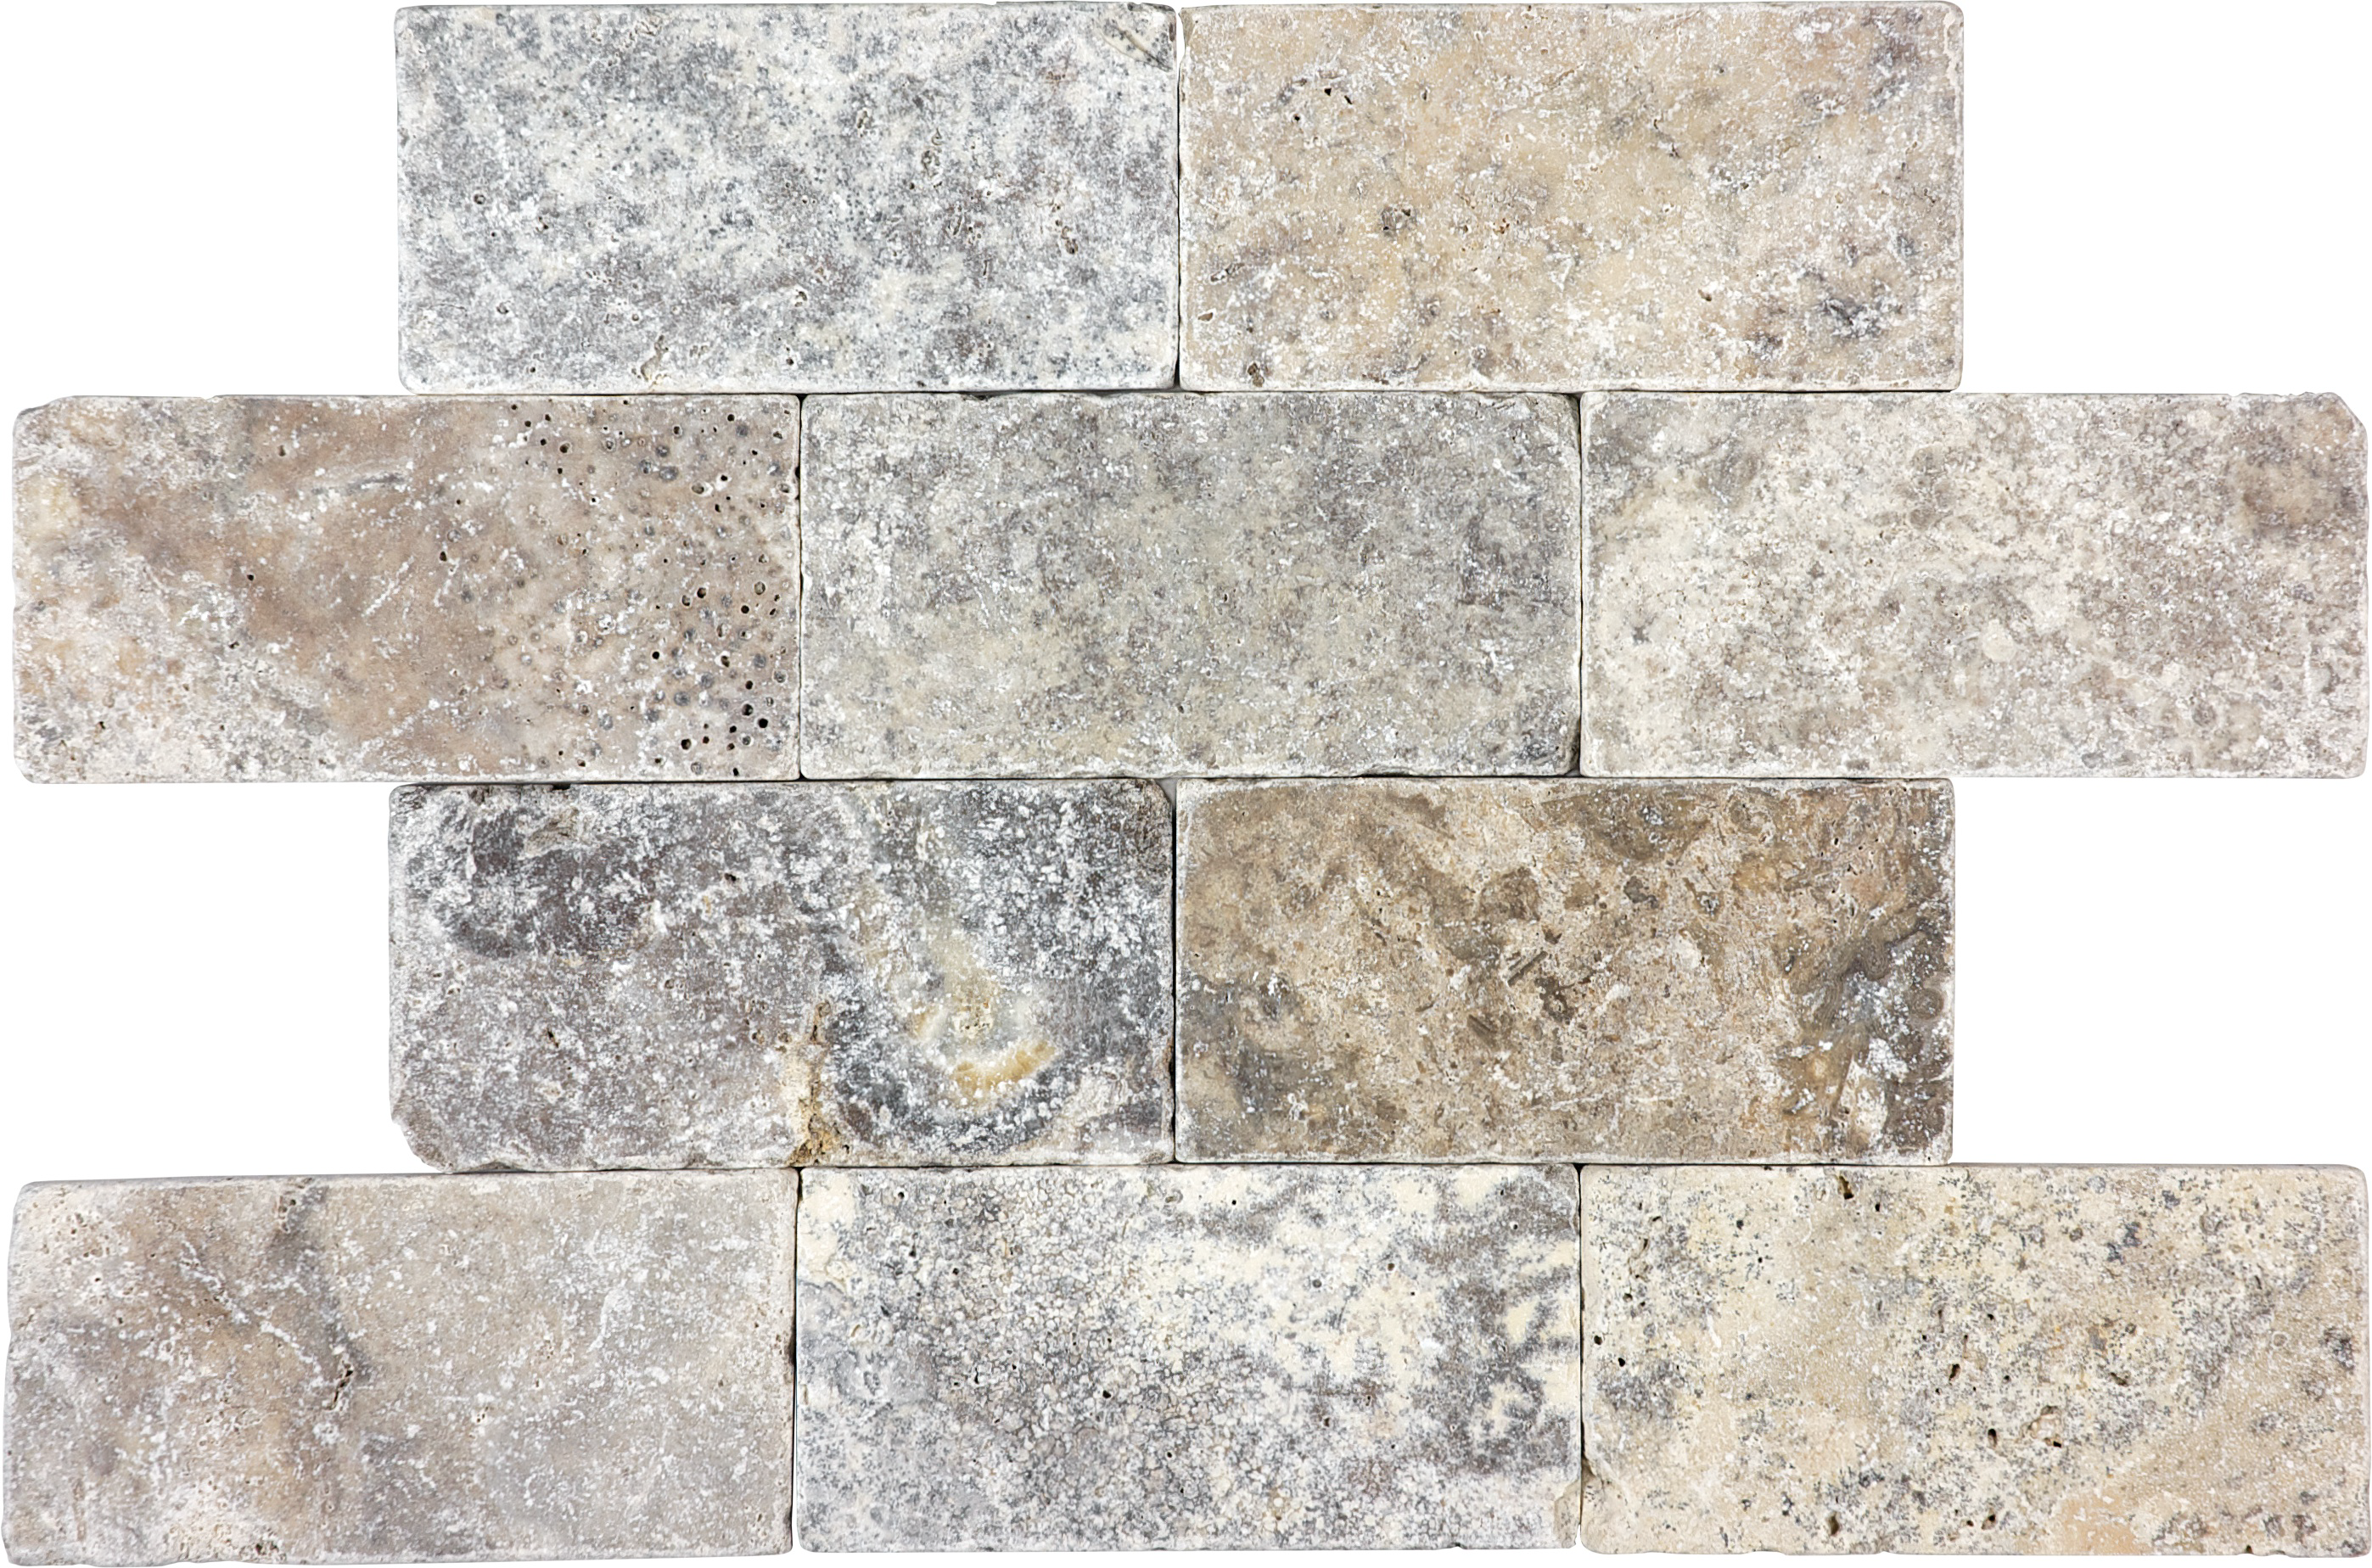 travertine pattern natural stone field tile from silver ash anatolia collection distributed by surface group international tumbled finish tumbled edge 3x6 rectangle shape